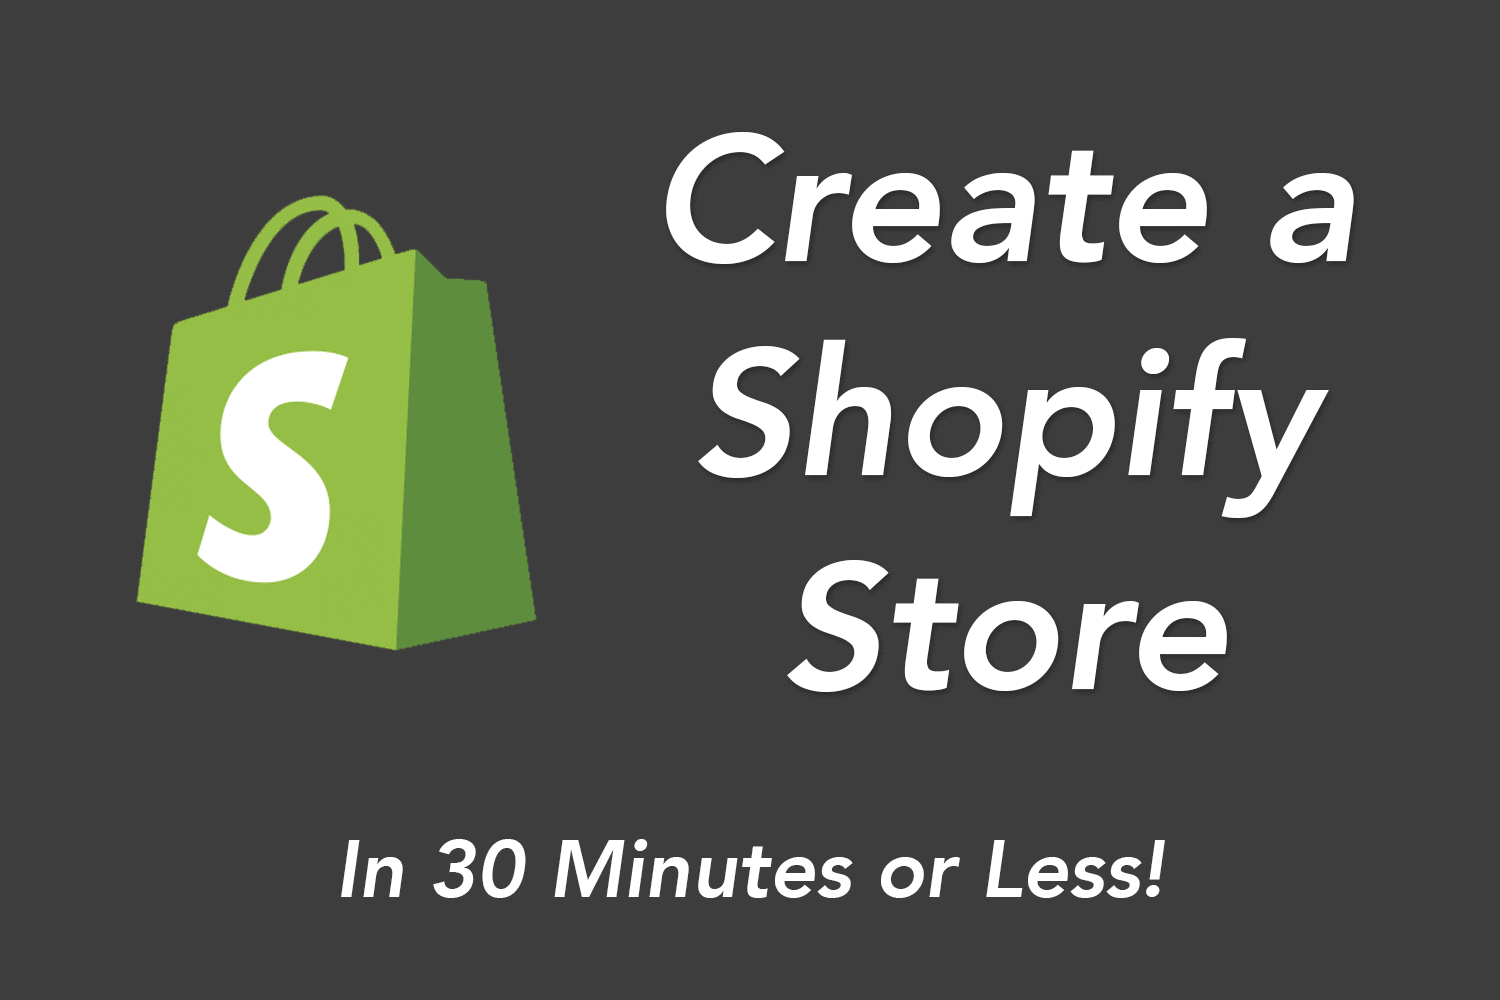 How to create a Shopify store in 30 minutes or less (Updated 2020)